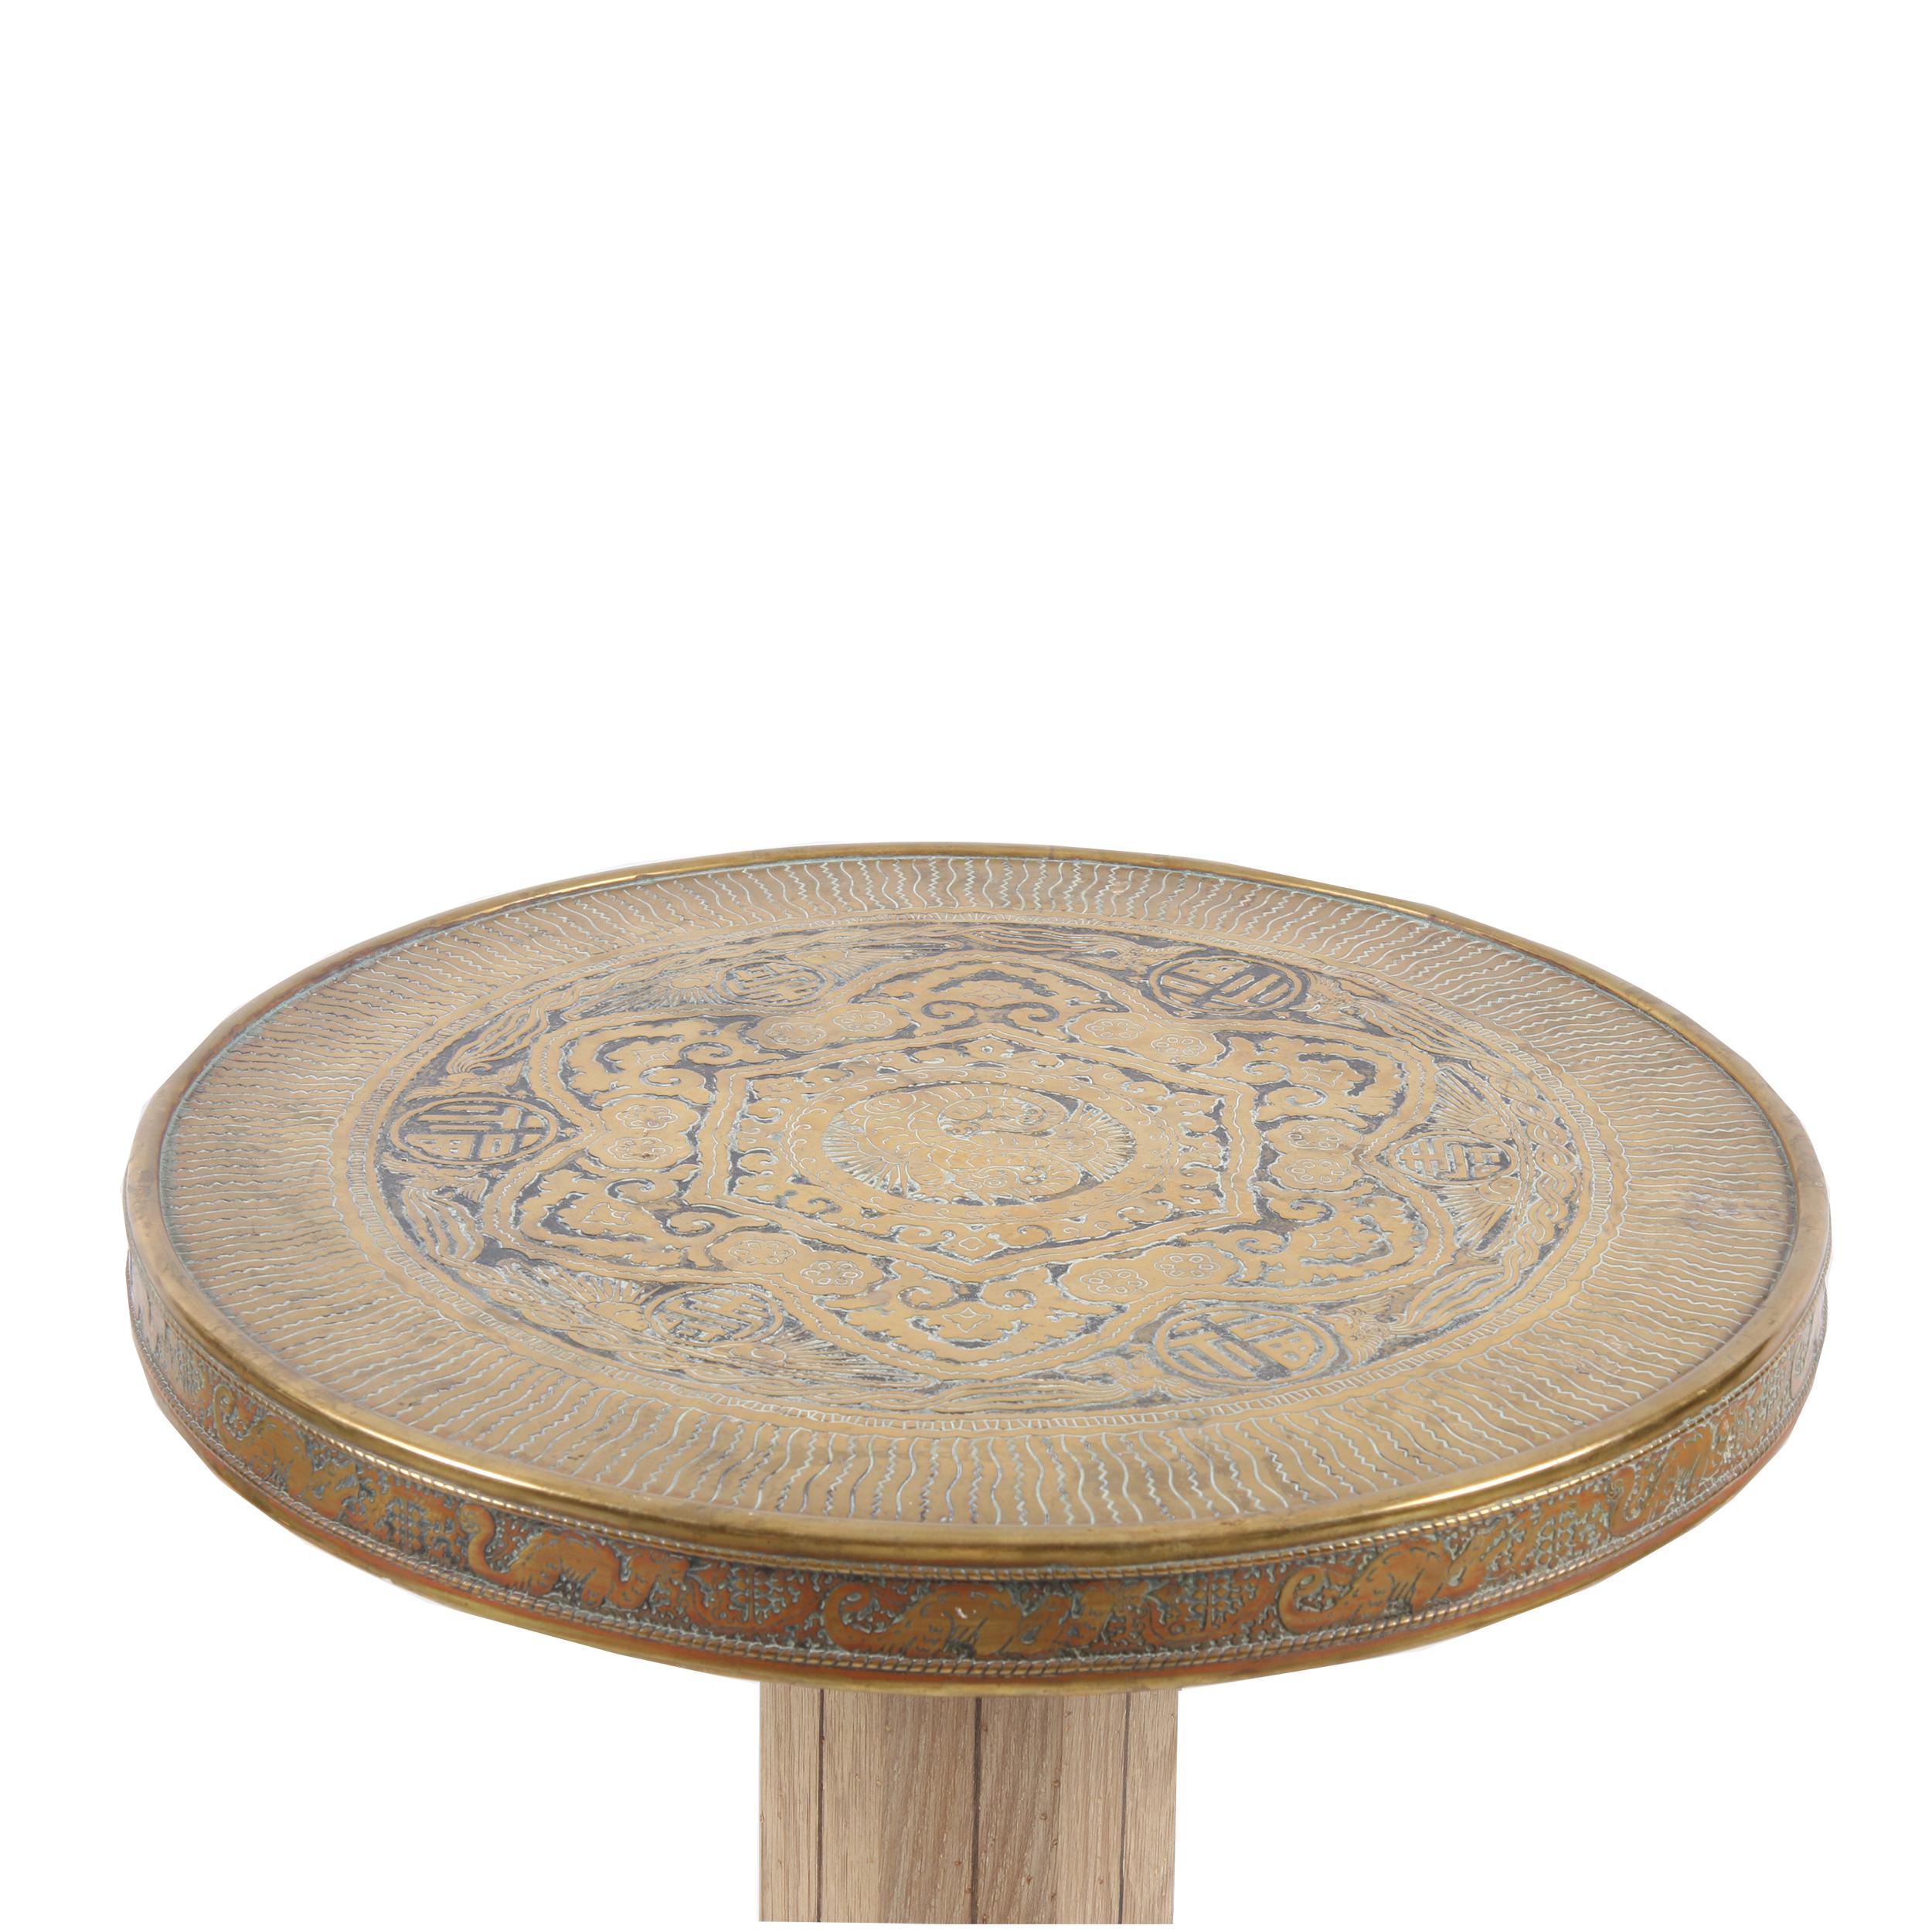 This side table features an incredibly detailed top, using the repusé method (hammered in), with dragons, birds, a sun motif and various characters. Every time you look at it, you find something new!

The base is made from ash, with a geometric